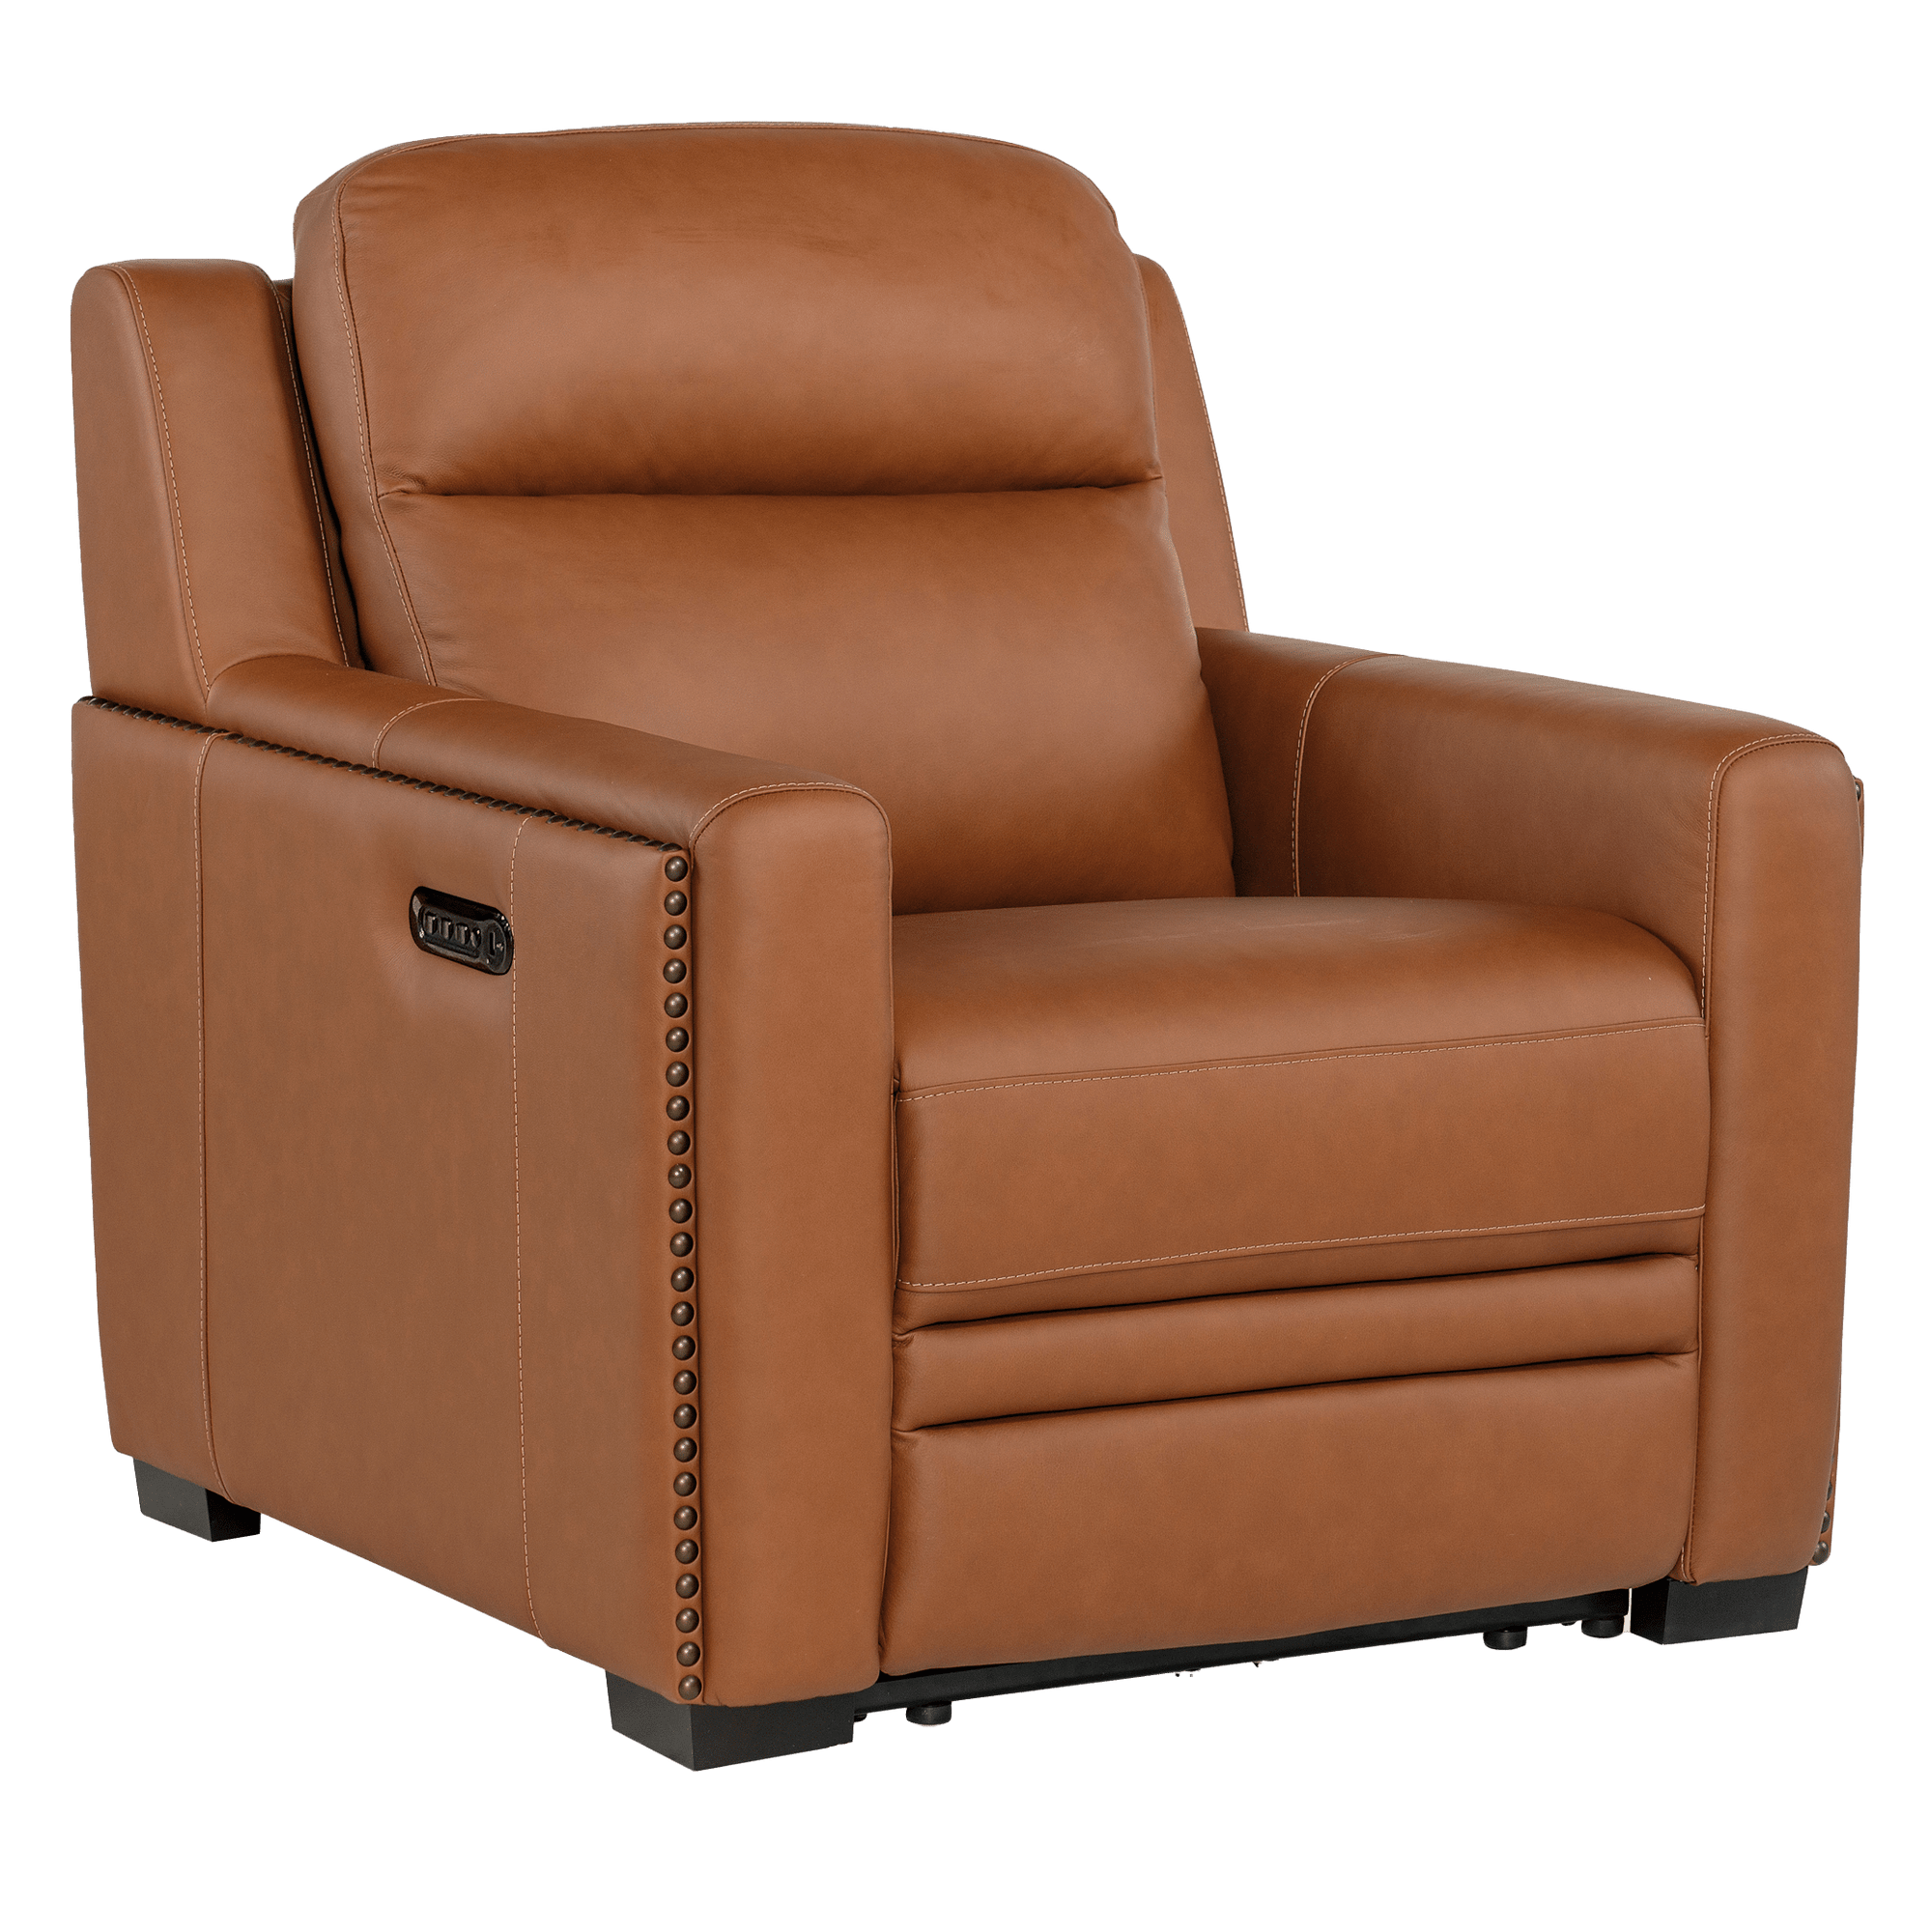 Marillis Power Recliner with Articulating Headrest and Lumbar Support, Leather